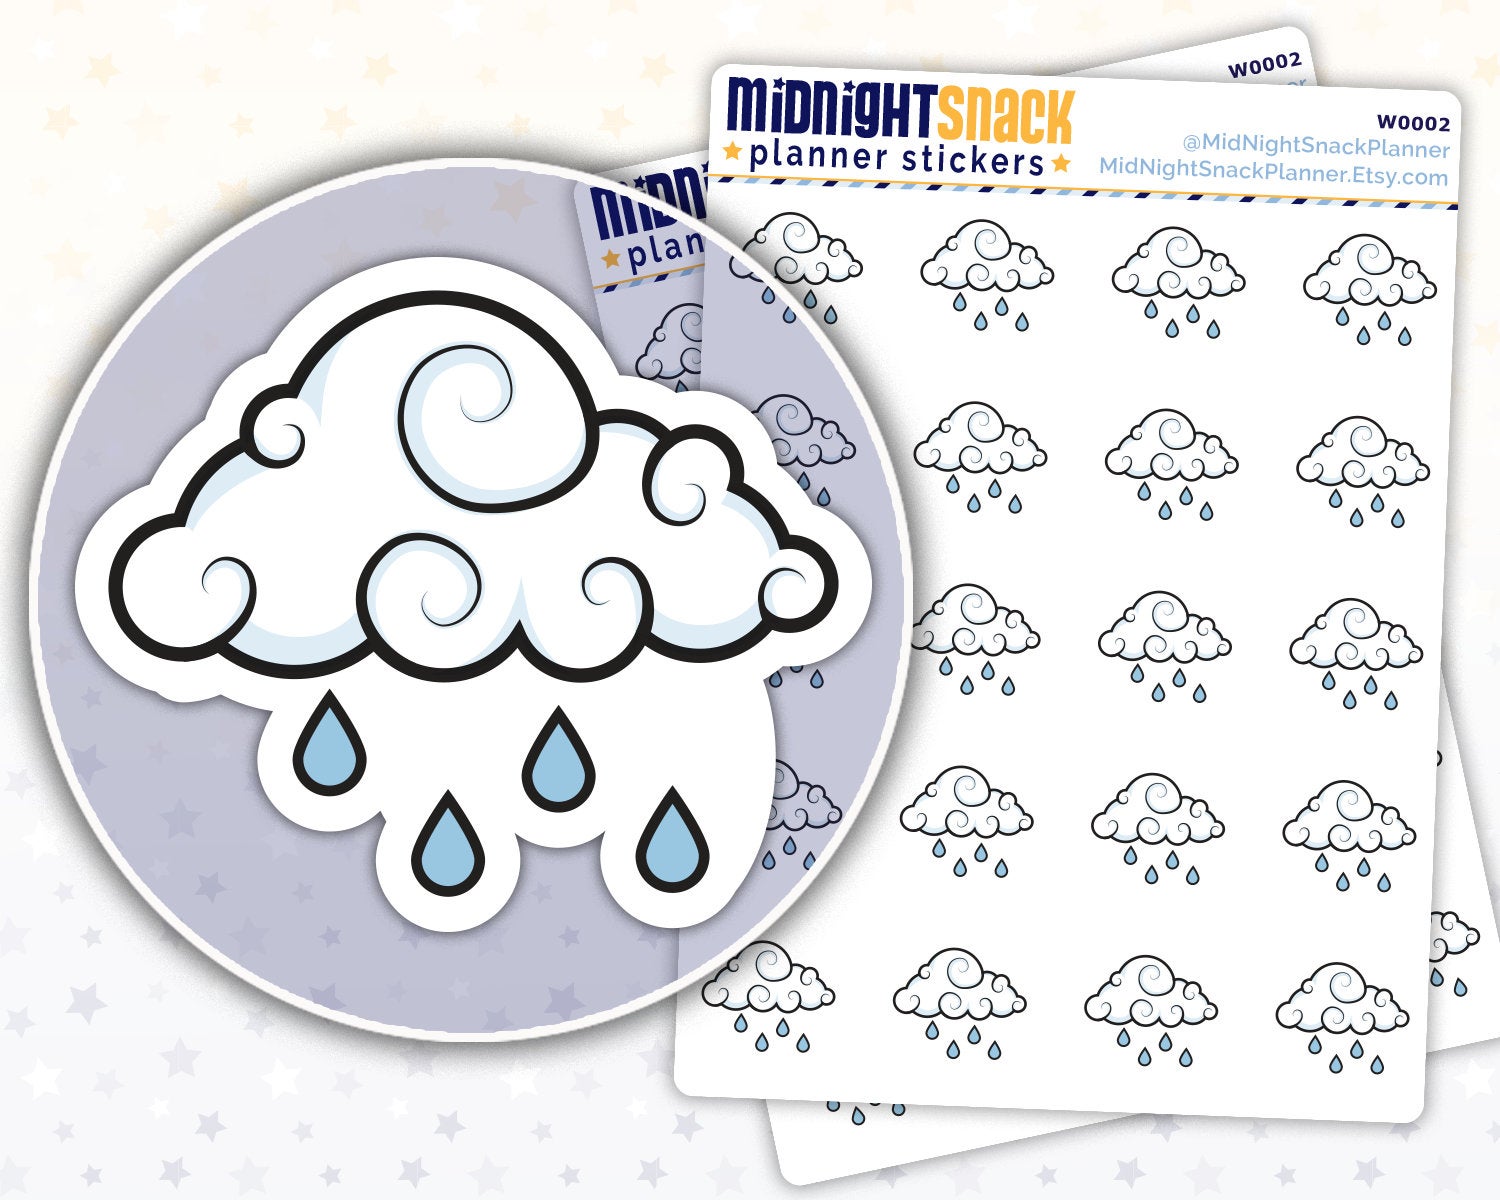 Rainy Day Icon: Weather Planner Stickers Midnight Snack Planner